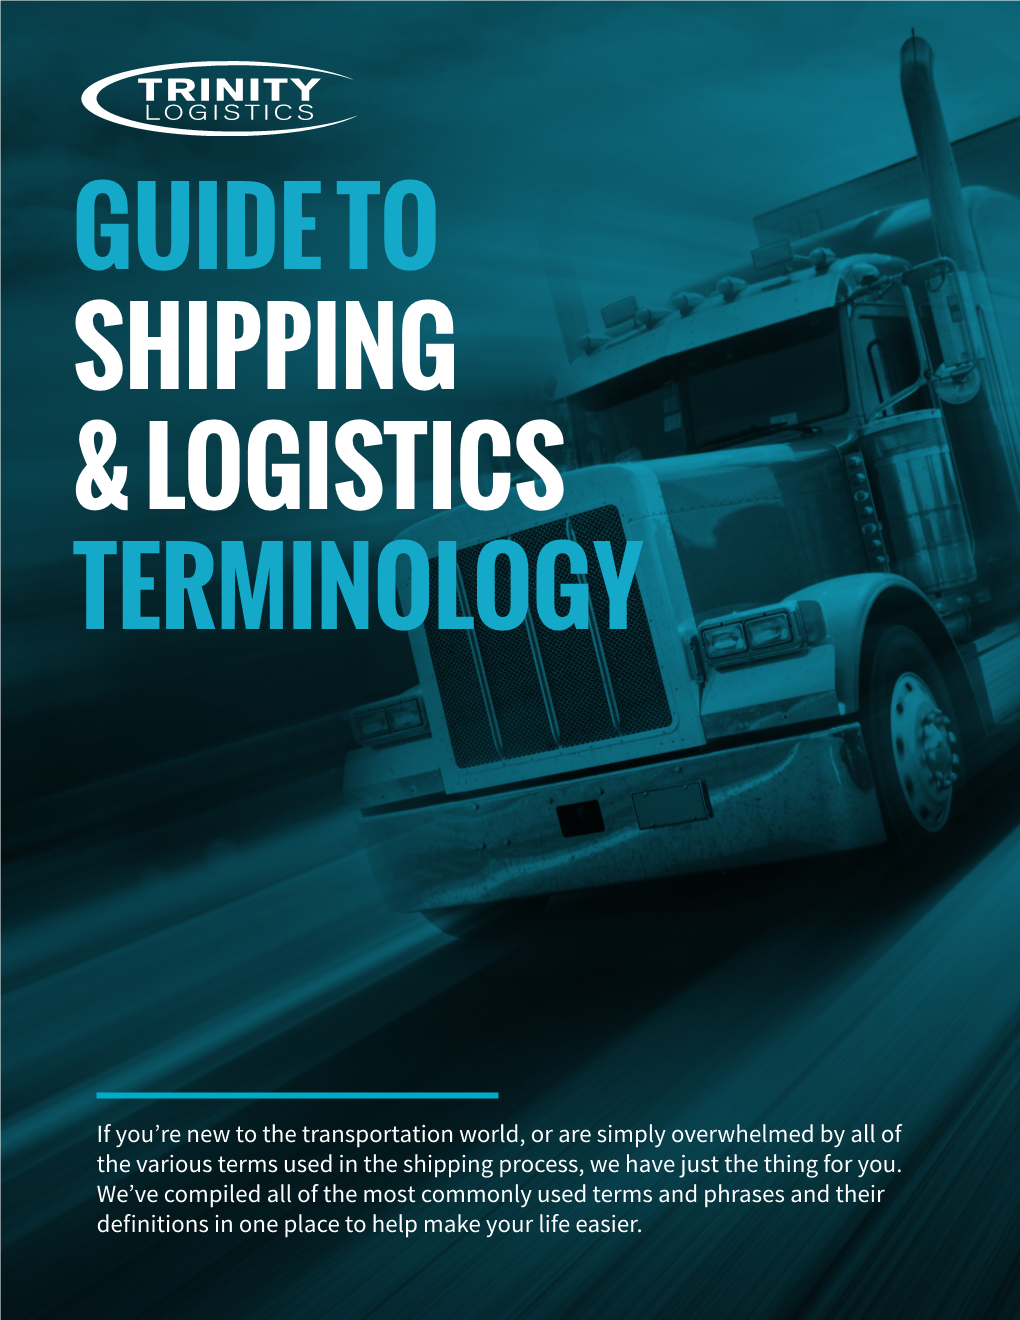 Guide to Shipping & Logistics Terminology